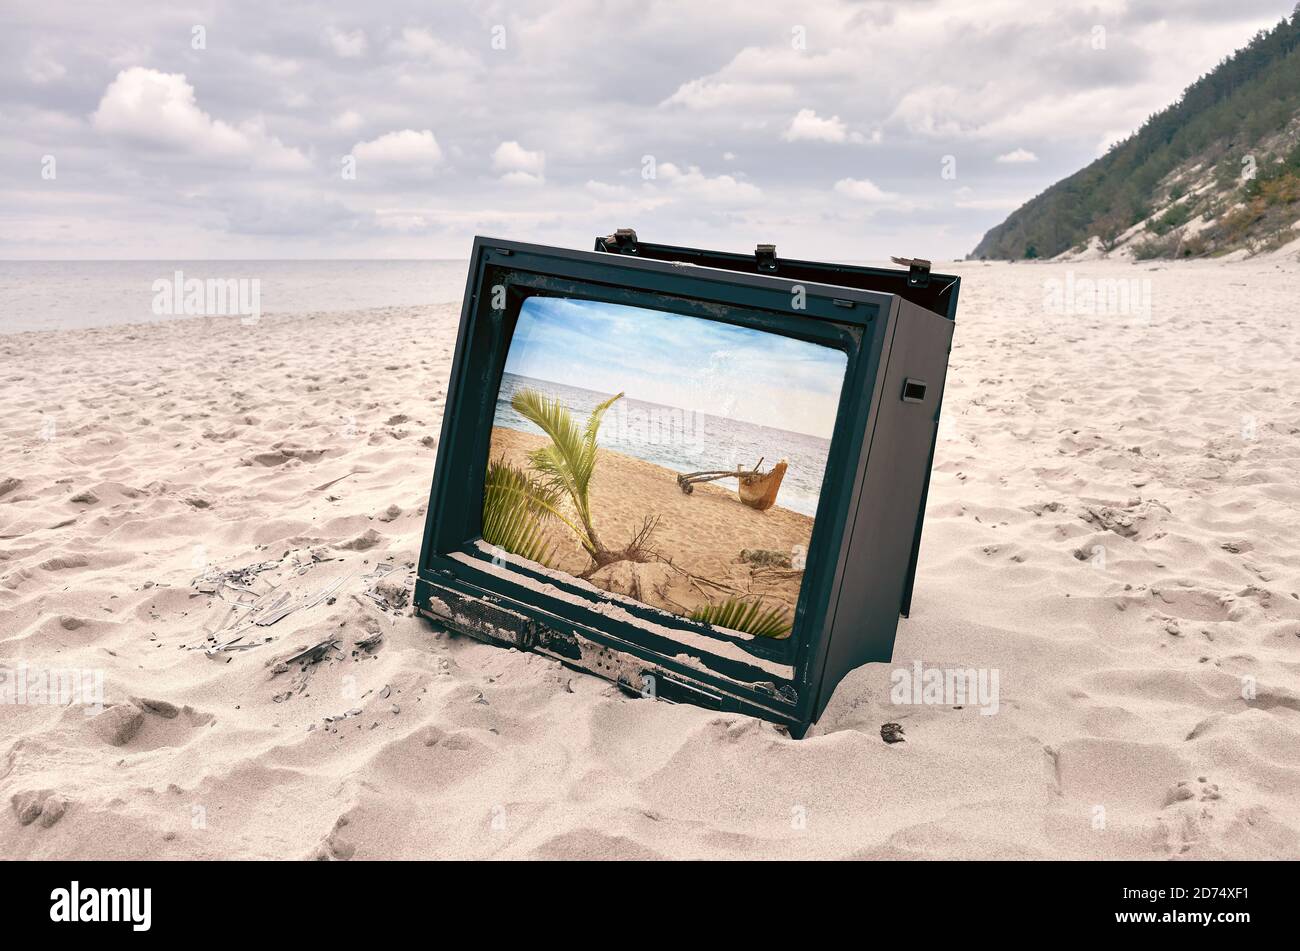 Old broken TV set on a beach with tropical view on display, color toning applied. Stock Photo